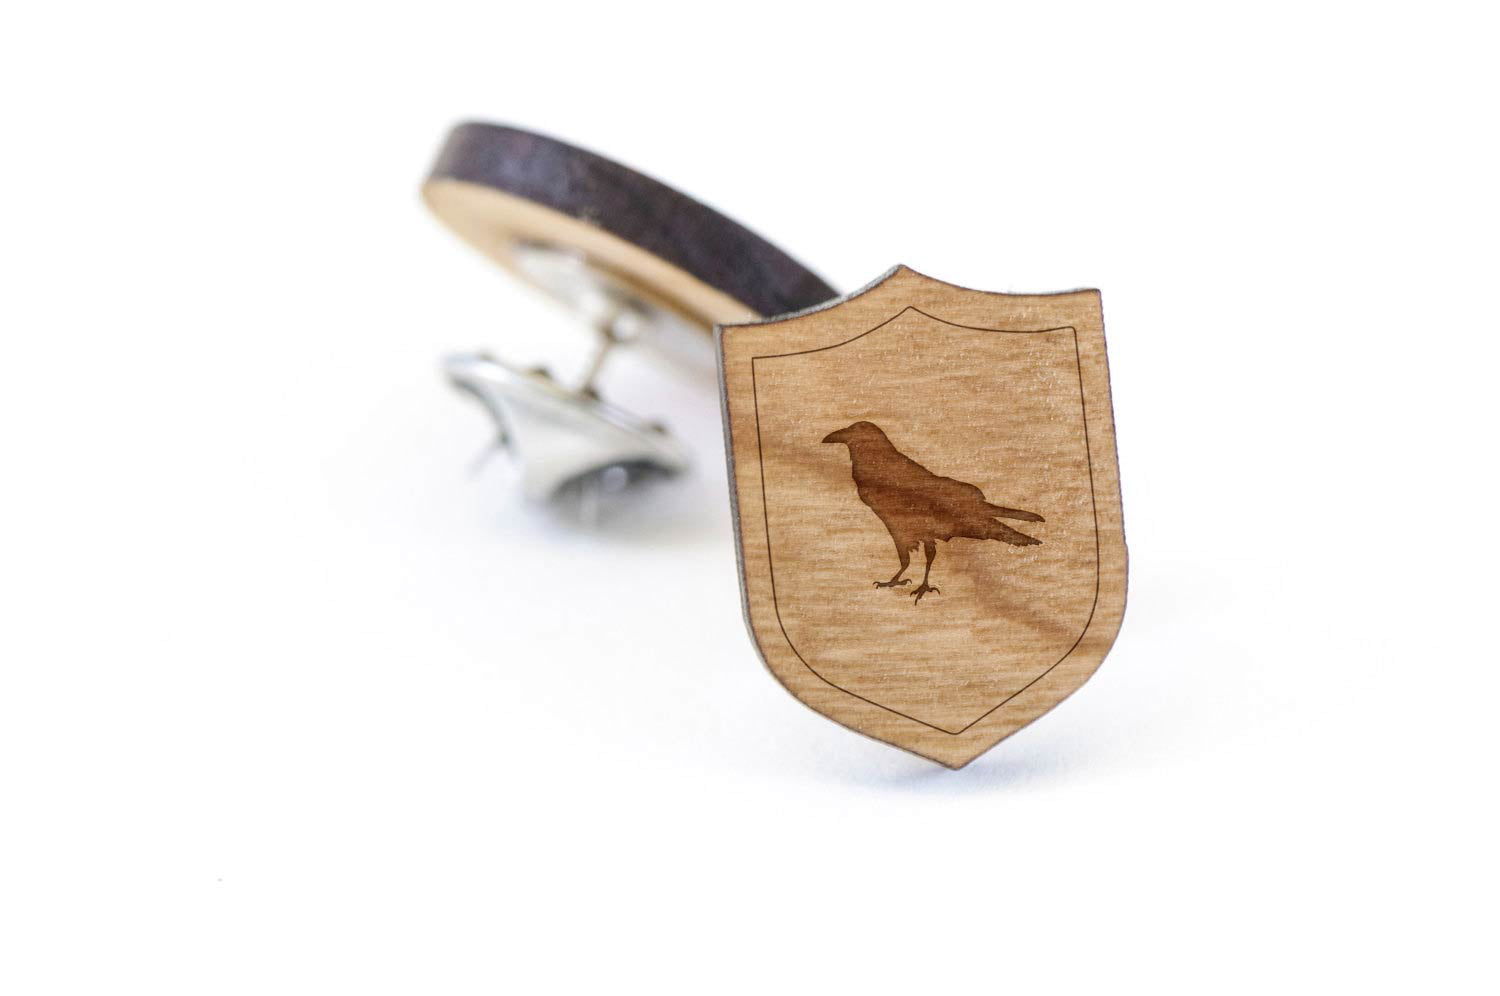 Wooden Pin and Tie Tack Rustic and Minimalistic Groomsmen Gifts and Wedding Accessories Flock of Birds Lapel Pin 